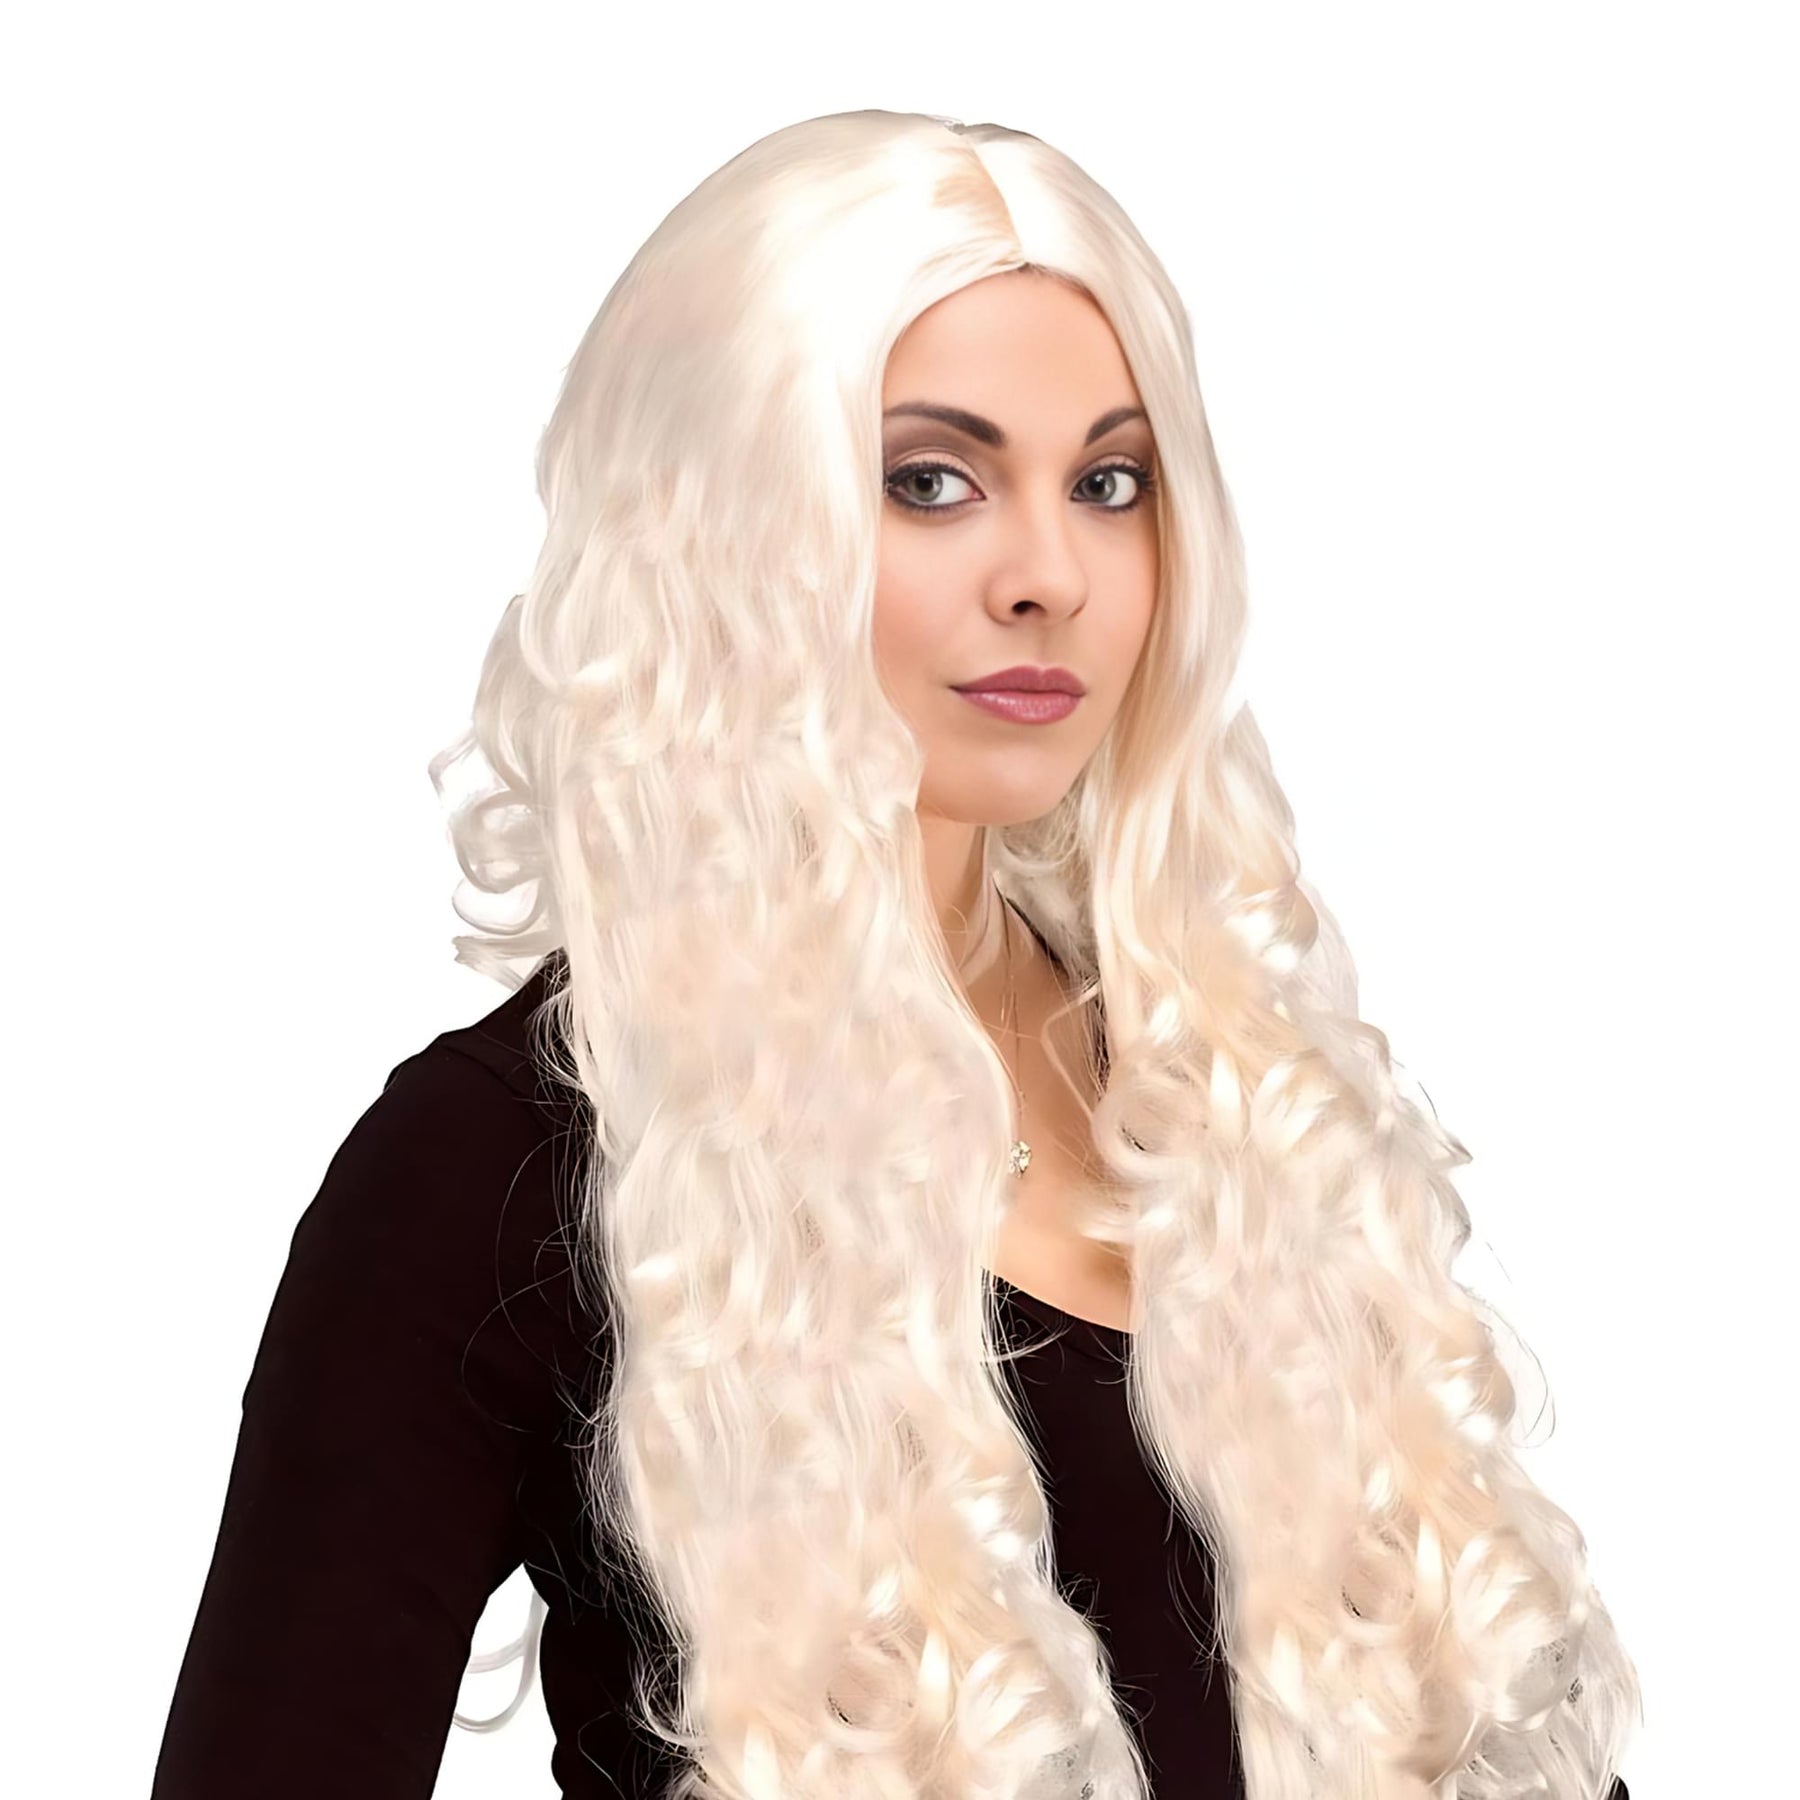 30" Curly Blonde Costume Wig